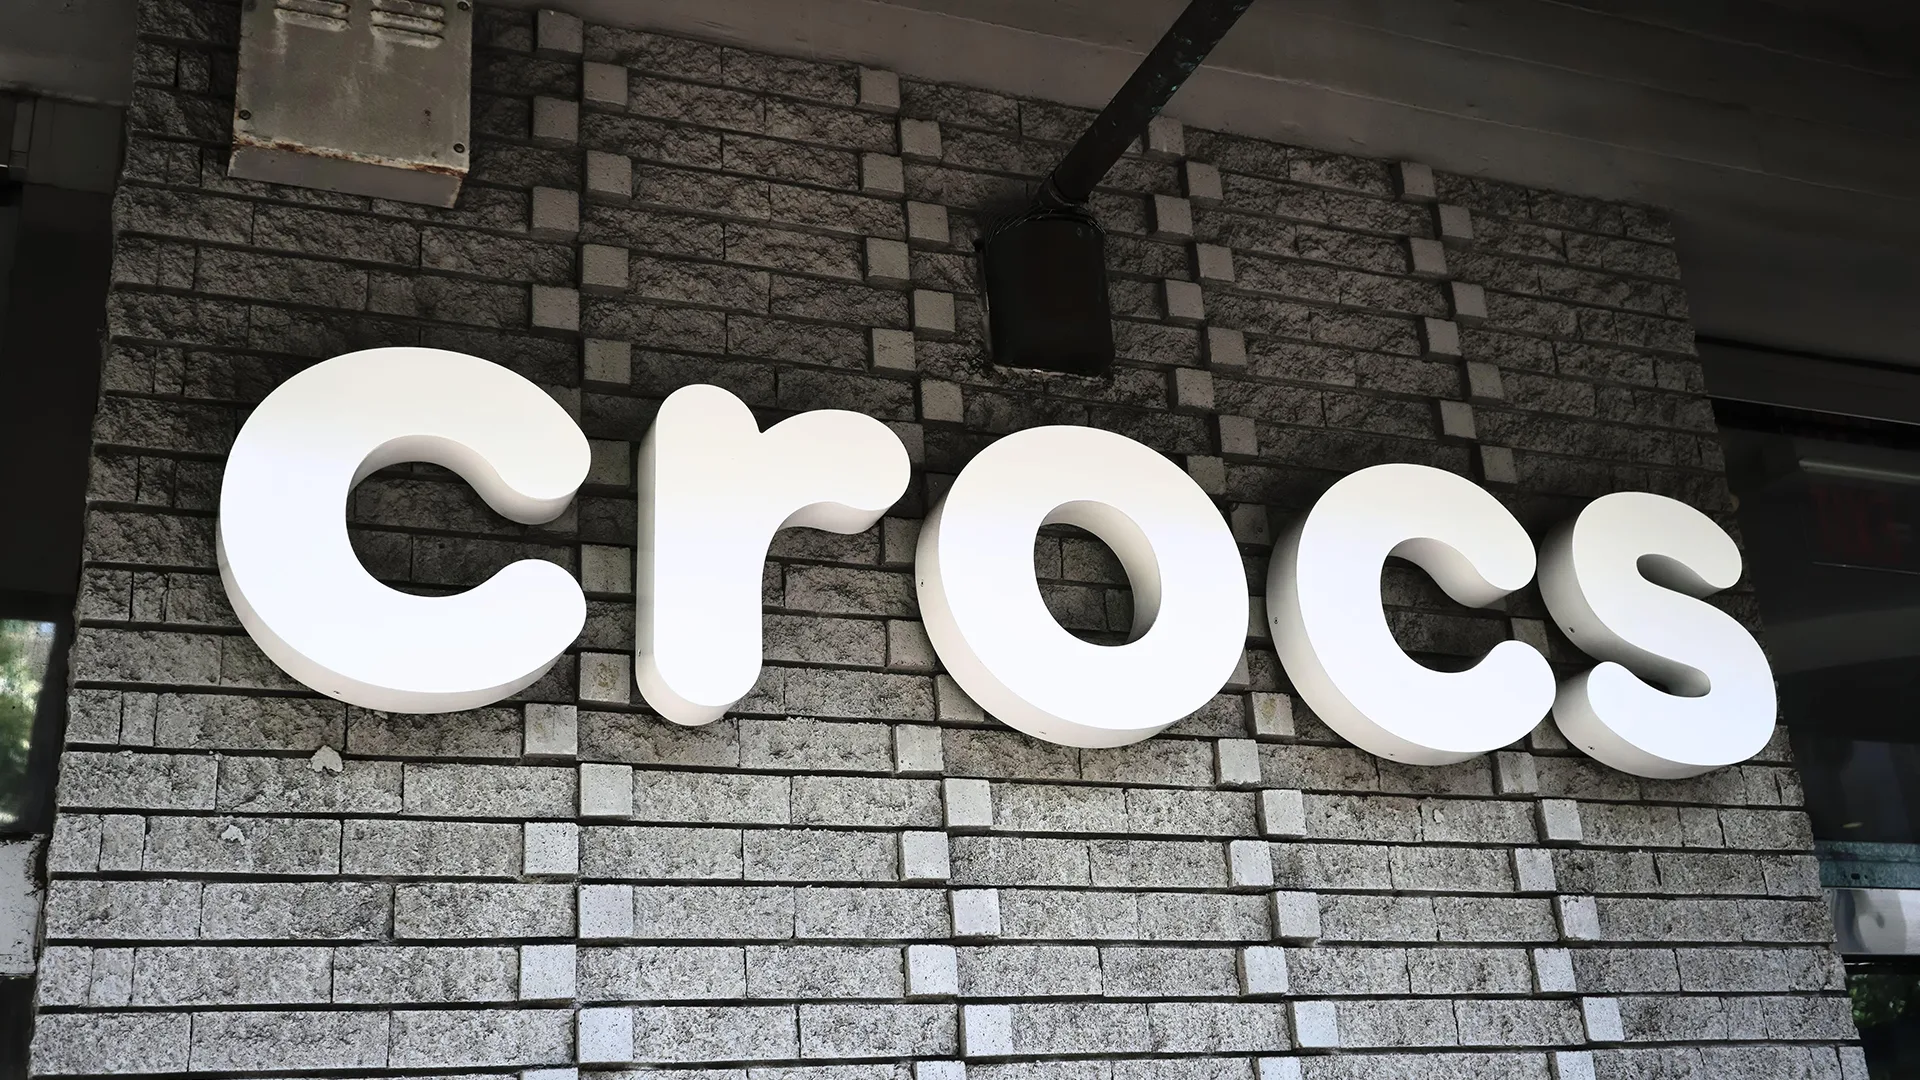 Crocs sign taken from outside a store. Written in white on a dark grey background